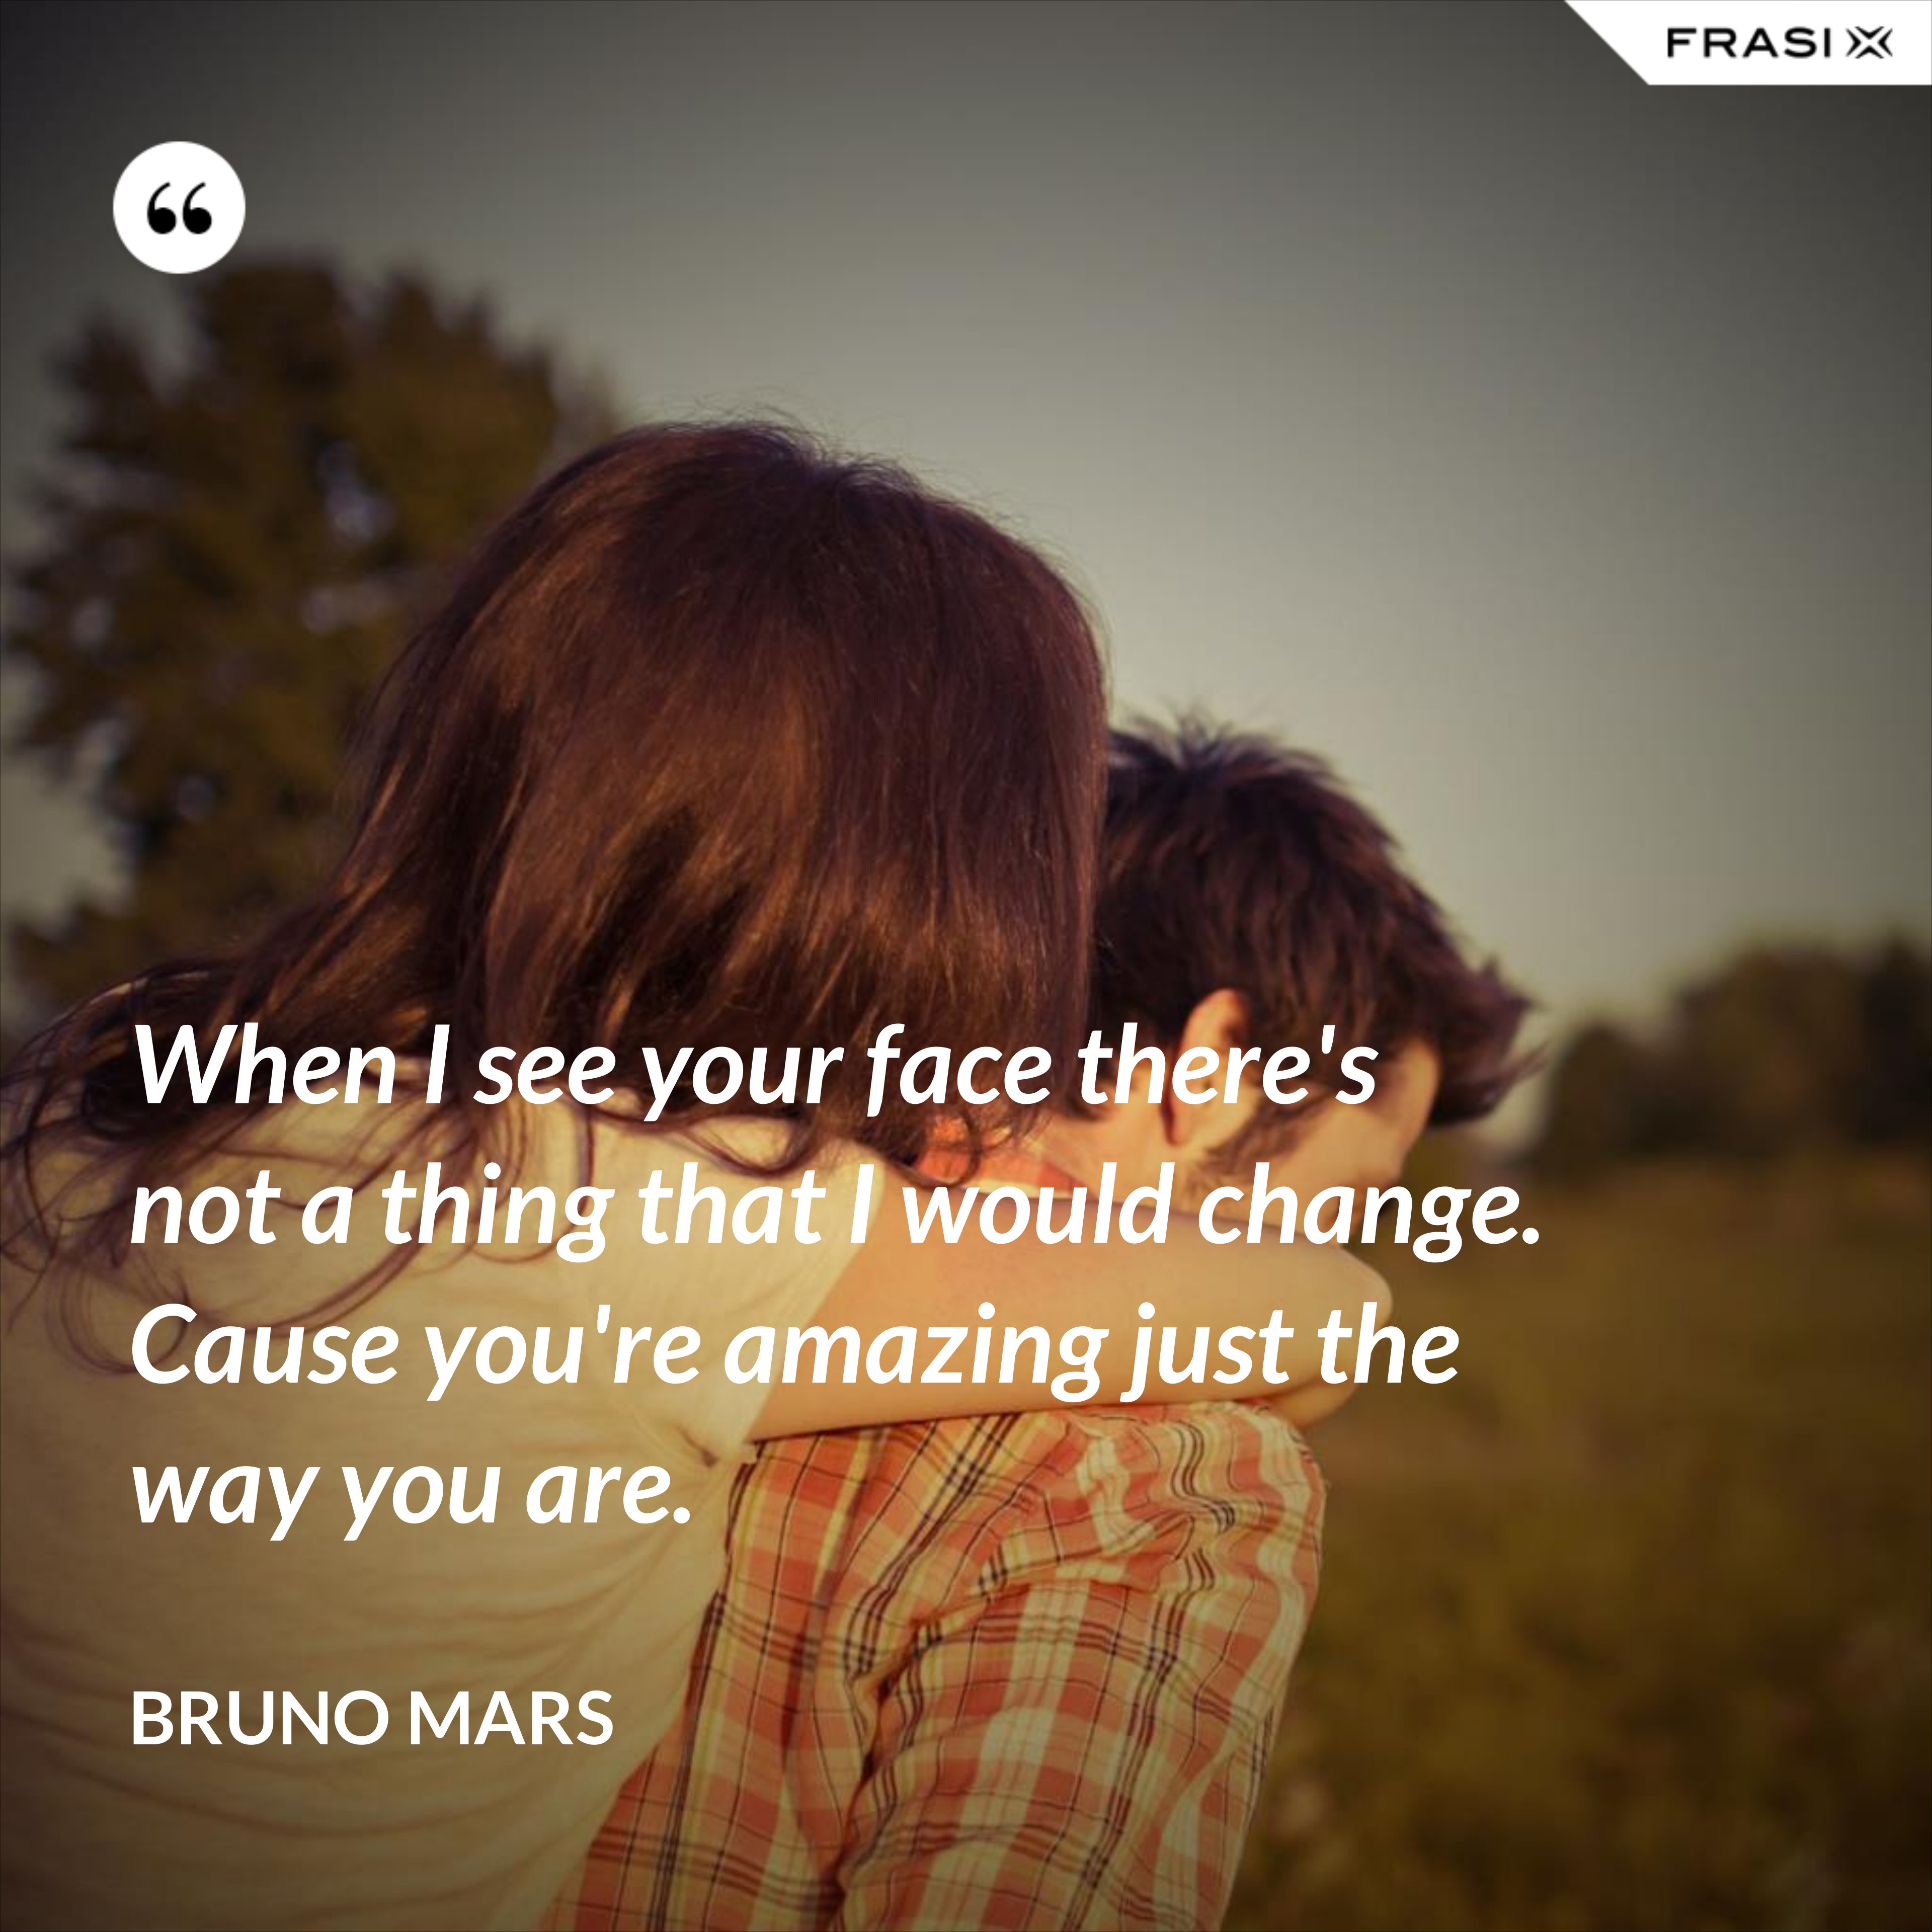 When I see your face there's not a thing that I would change. Cause you're amazing just the way you are. - Bruno Mars